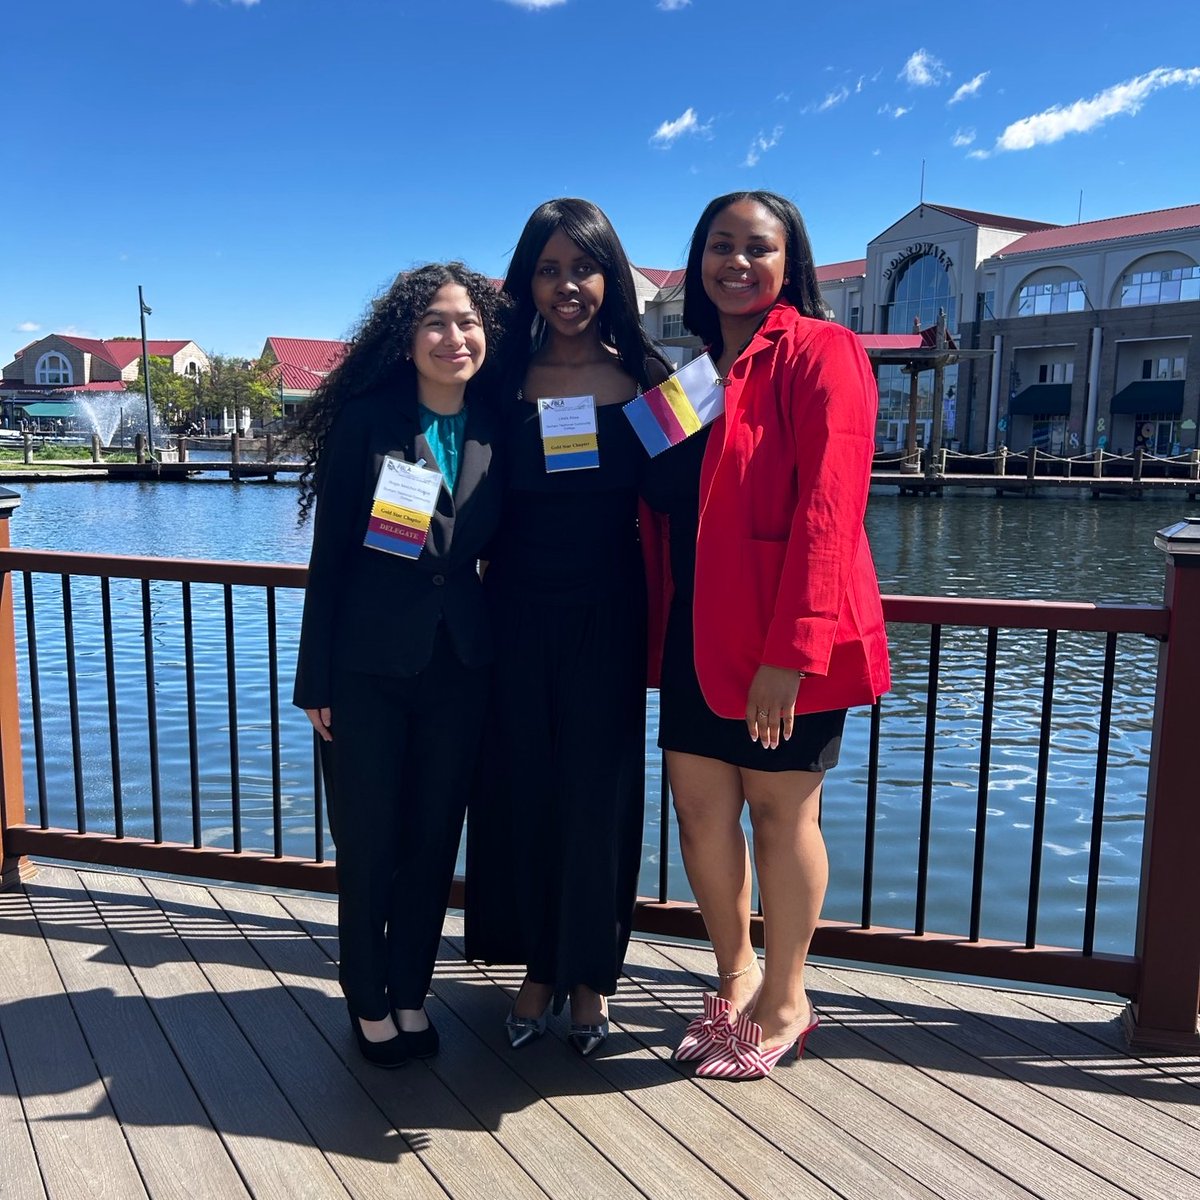 The Durham Tech Future Business Leaders of America chapter recently traveled to the State Leadership Conference in Charlotte. Syderia Alston (pictured right) won 2nd place in Public Speaking and qualified for the National Leadership Conference in Orlando, FL. 👏 #DoGreatThings